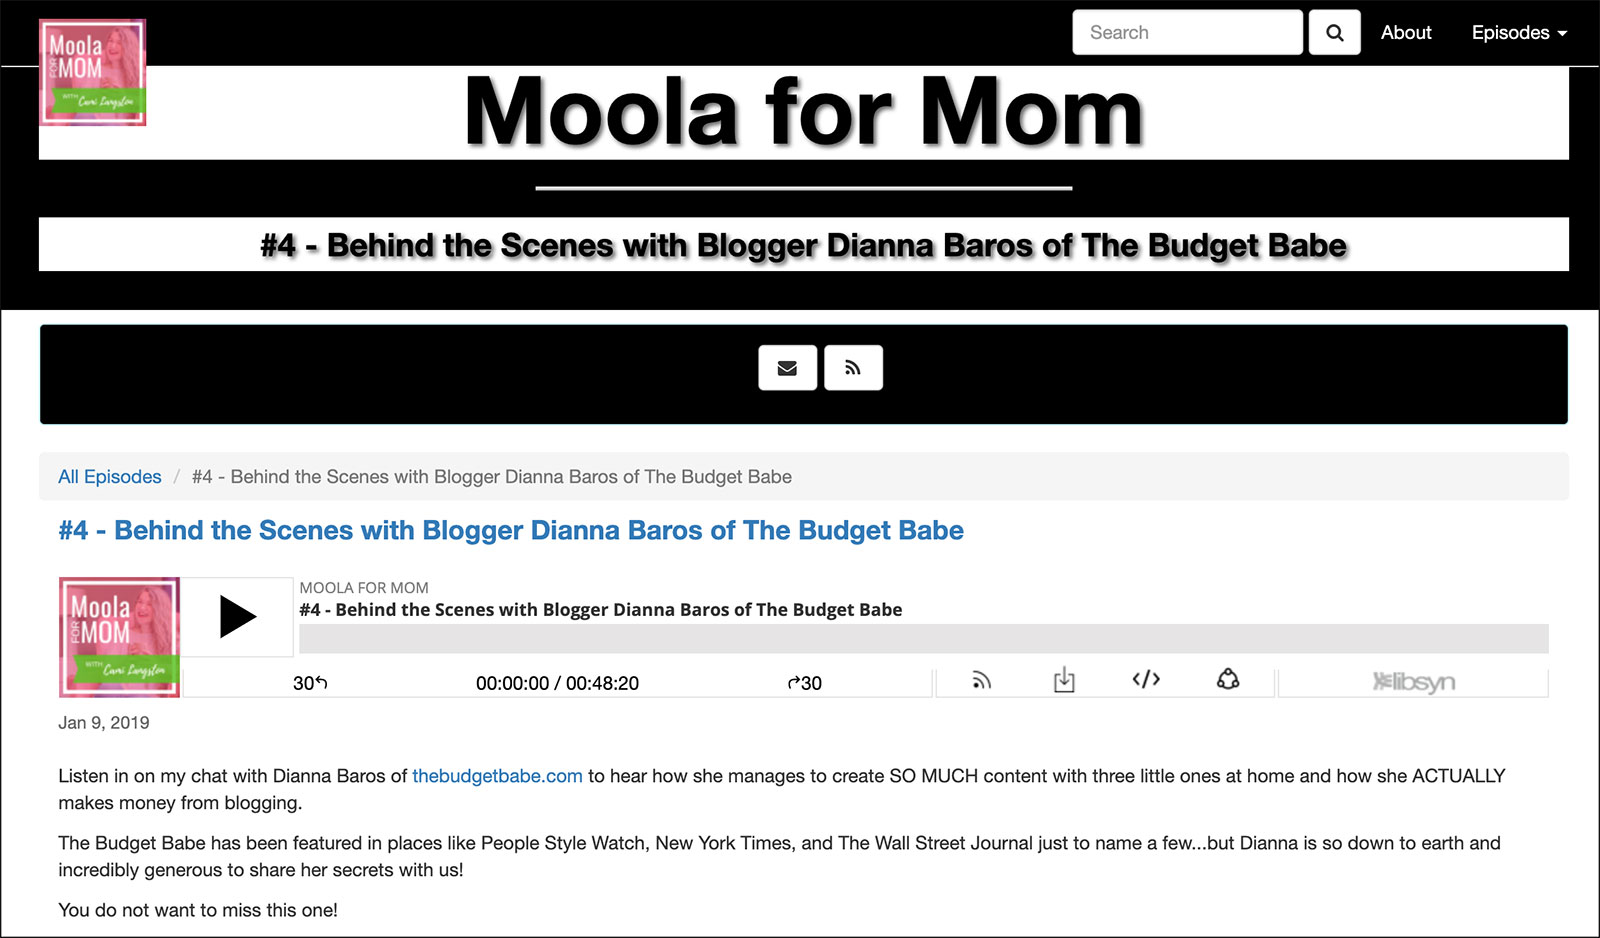 Moola for Mom podcast with The Budget Babe's Dianna Baros